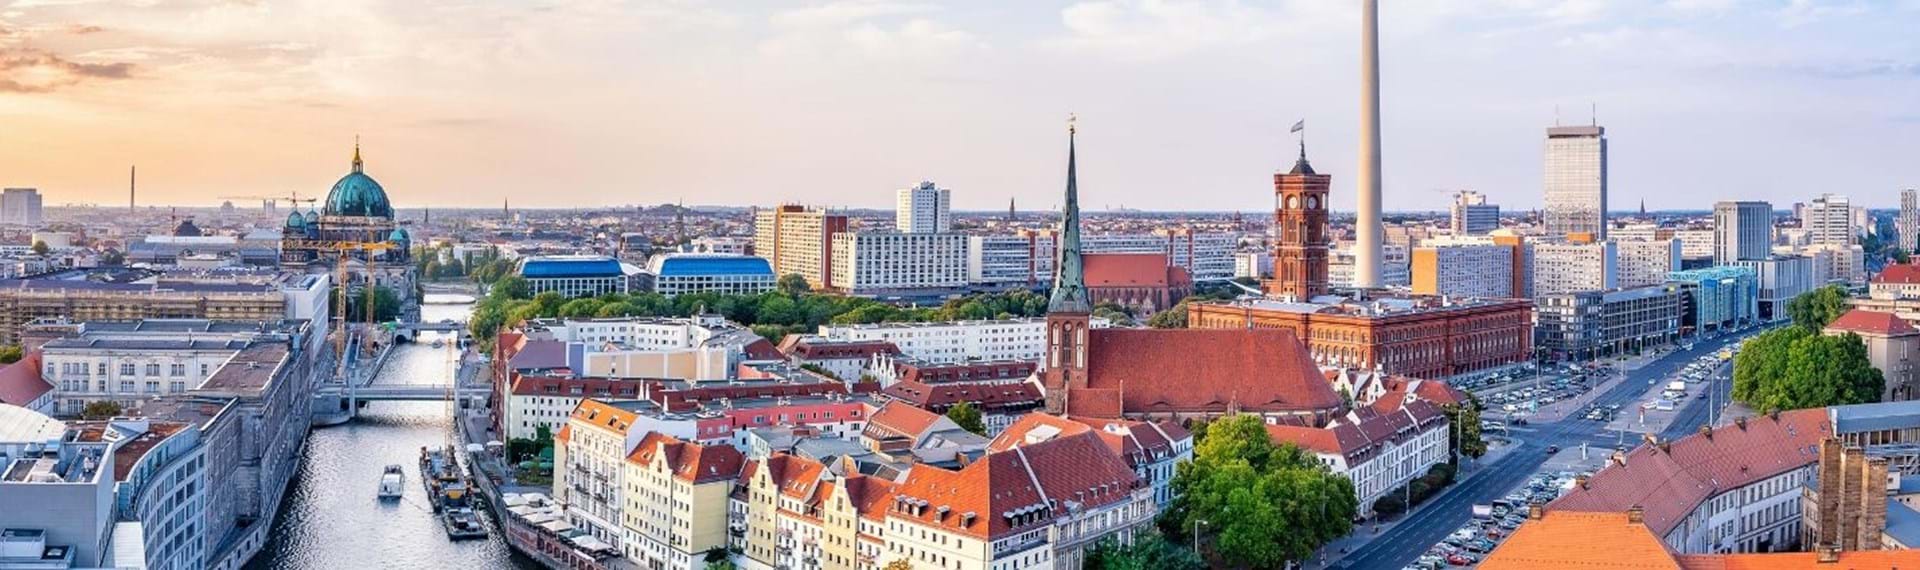 10 Interesting Facts about Berlin | Travel Department